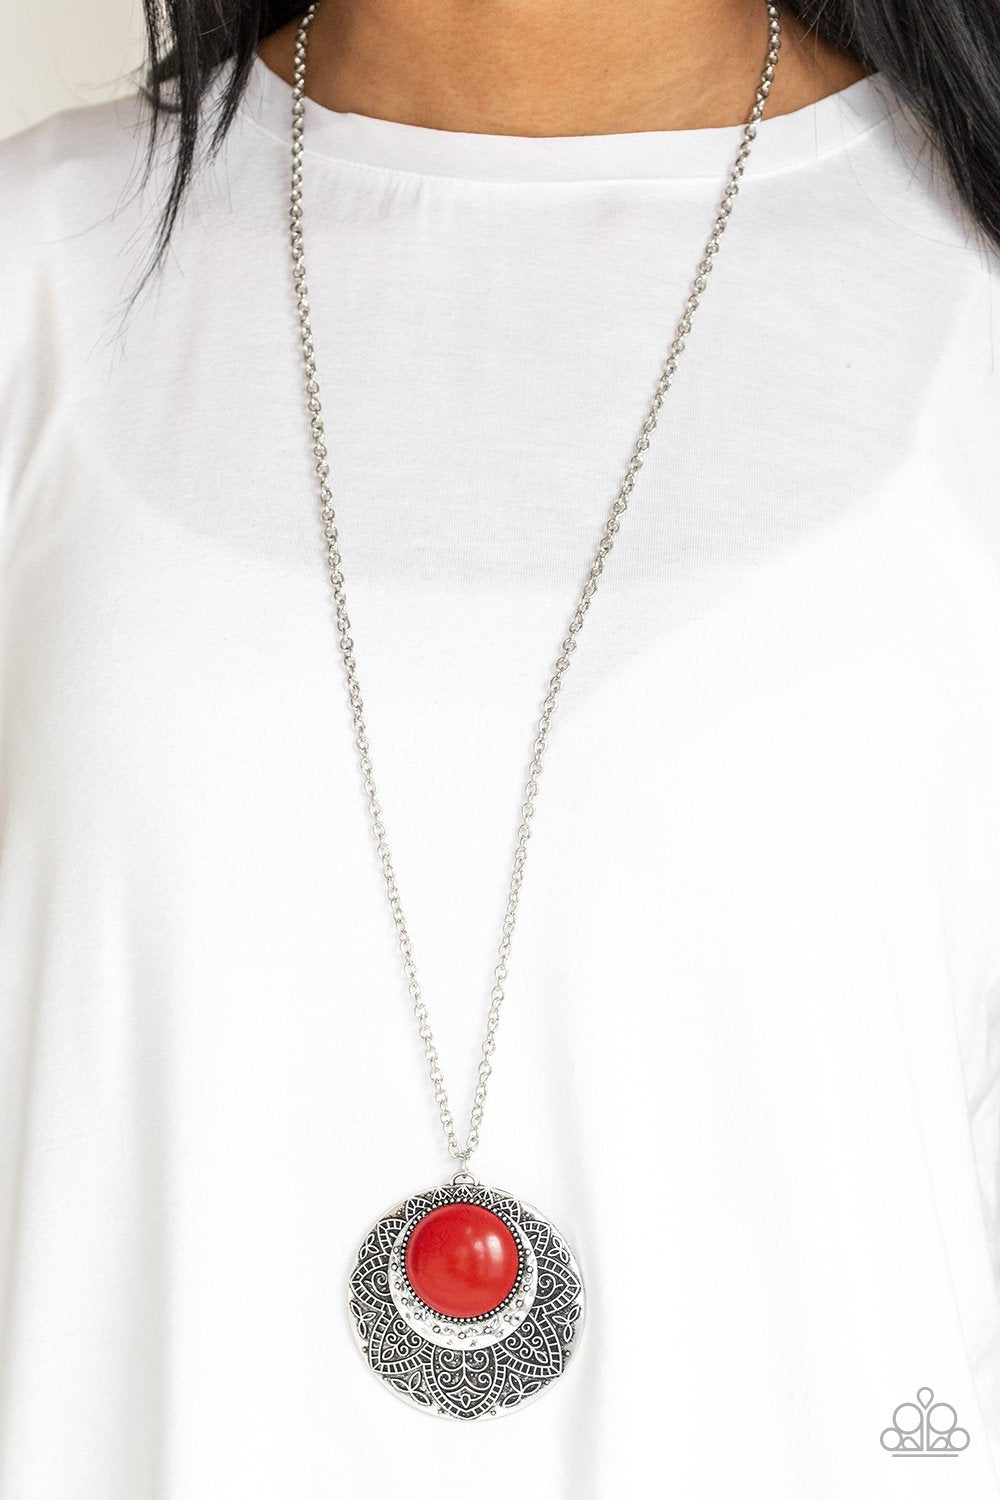 Medallion Meadow-red-Paparazzi necklace